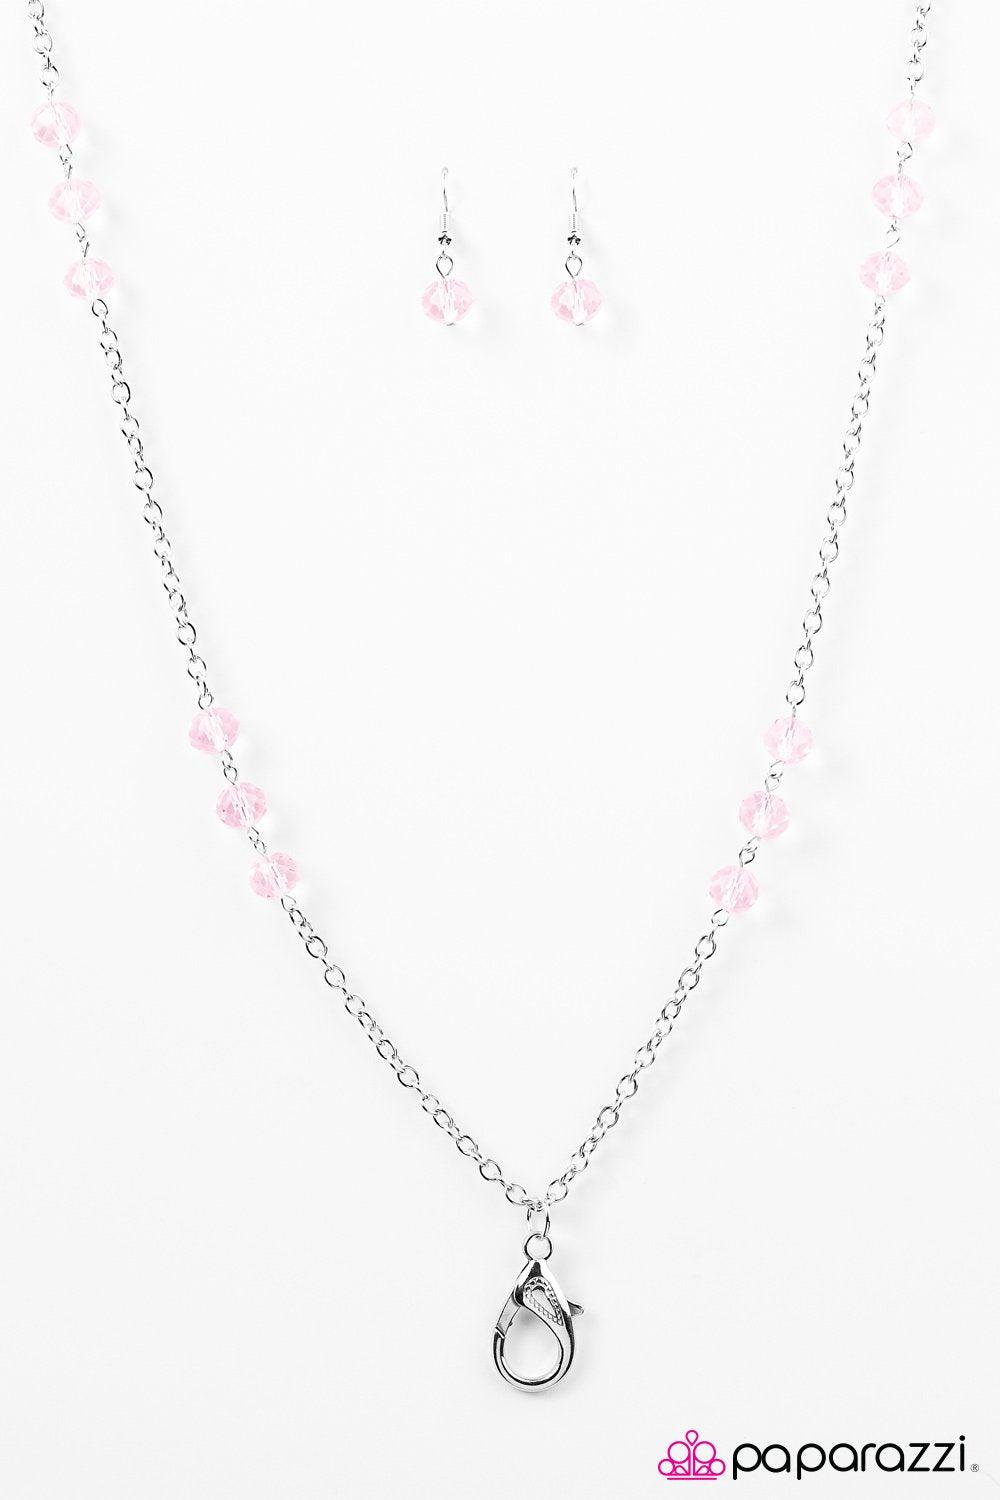 Glitzy-est Of Them All Pink Lanyard Necklace - Paparazzi Accessories-CarasShop.com - $5 Jewelry by Cara Jewels